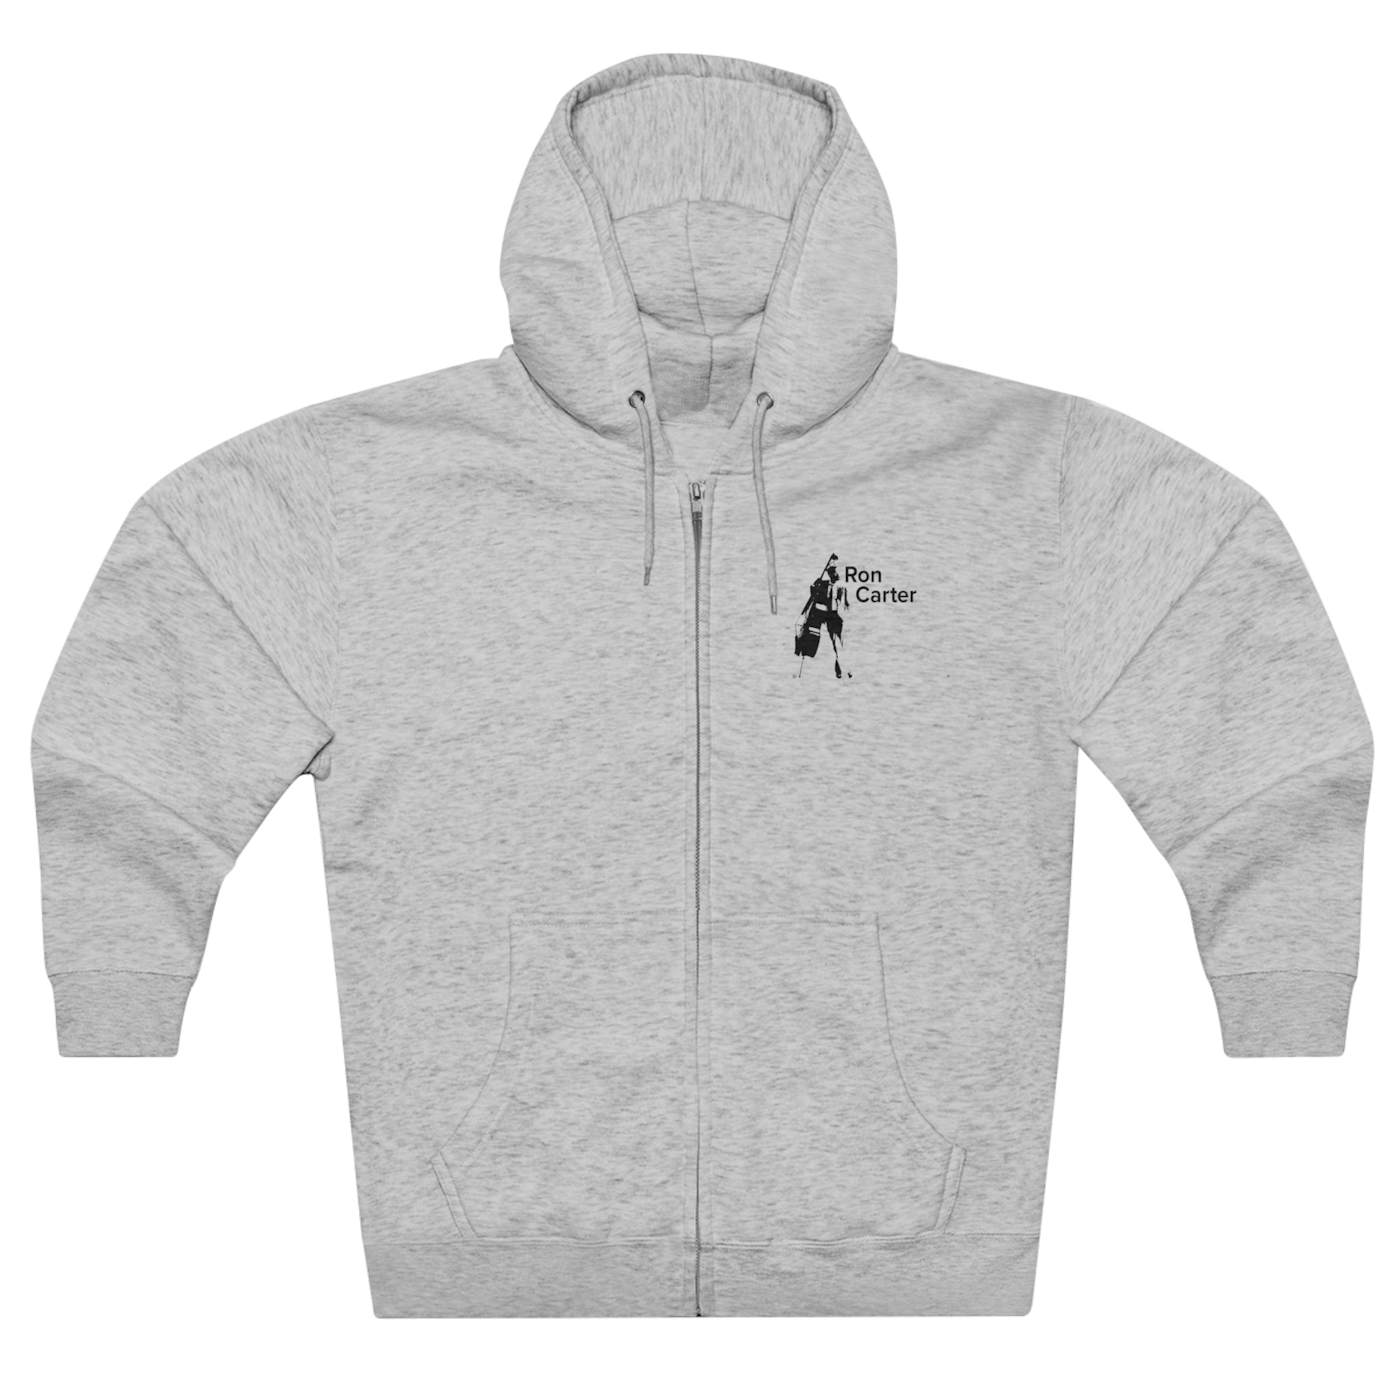 Ron Carter Planet Elegance Zip Hoodie Quote on Back